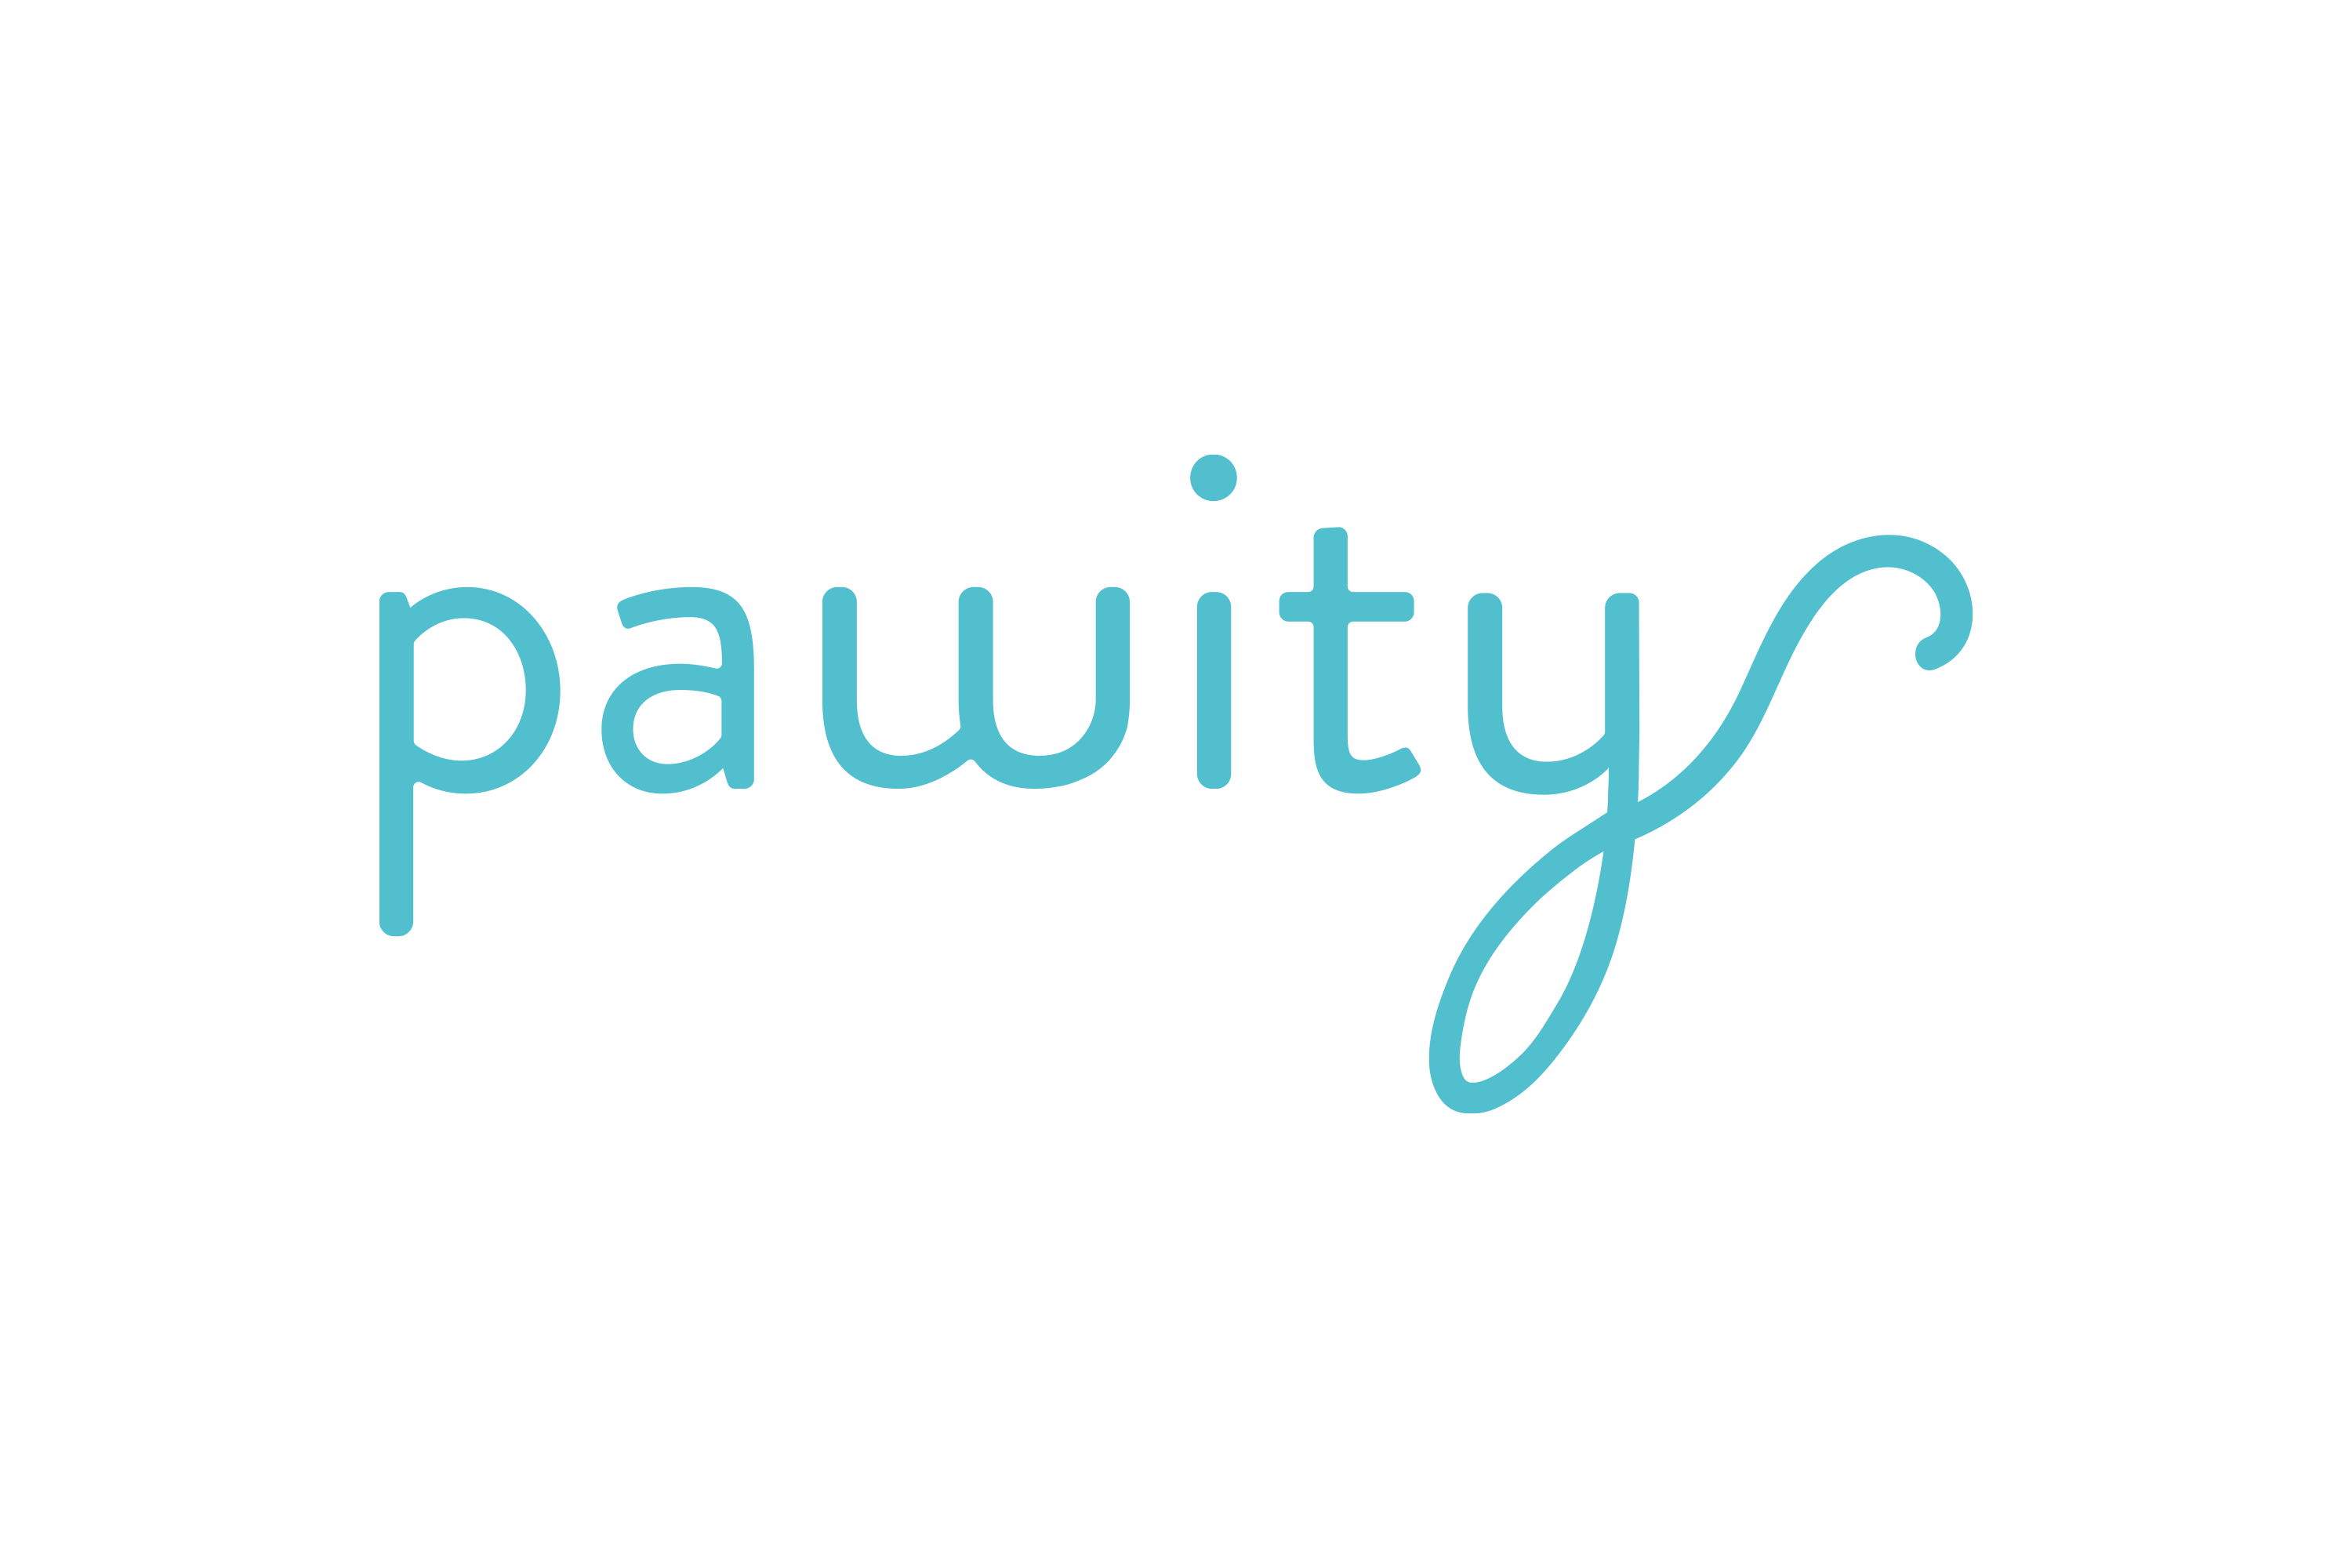 Pawity by María - Creative Work